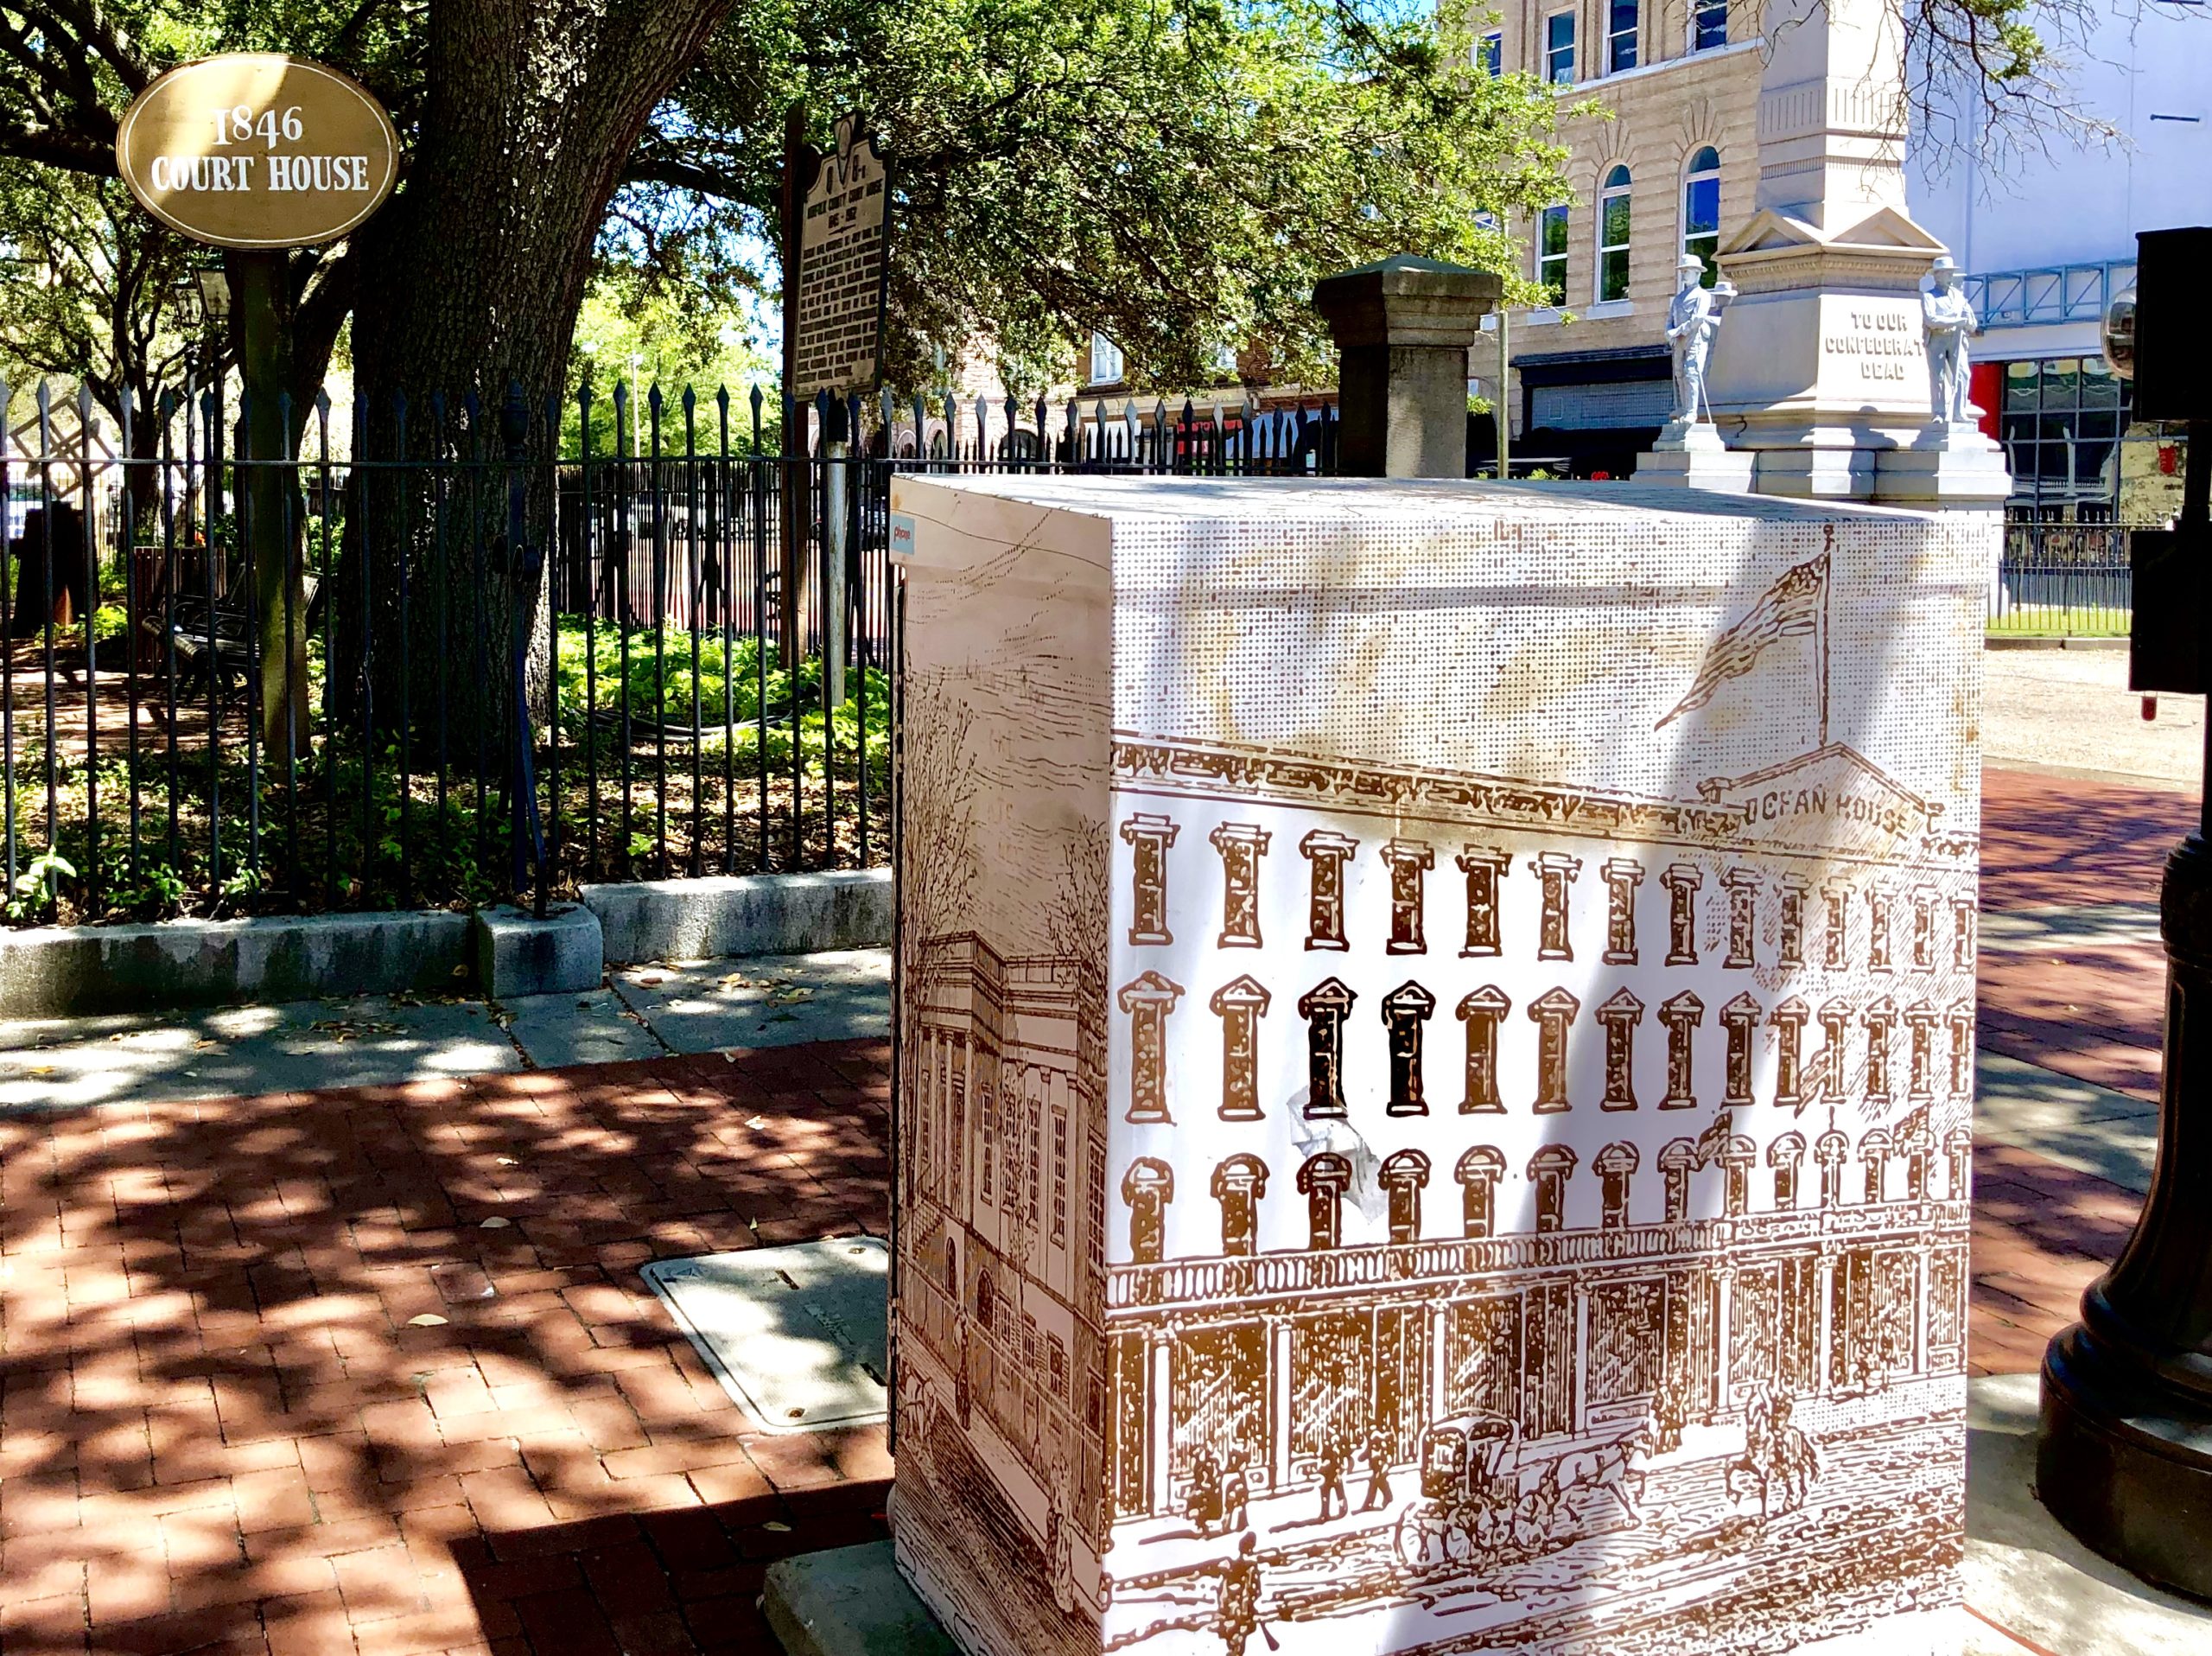 electrical box painted to look like courthouse square in 1846